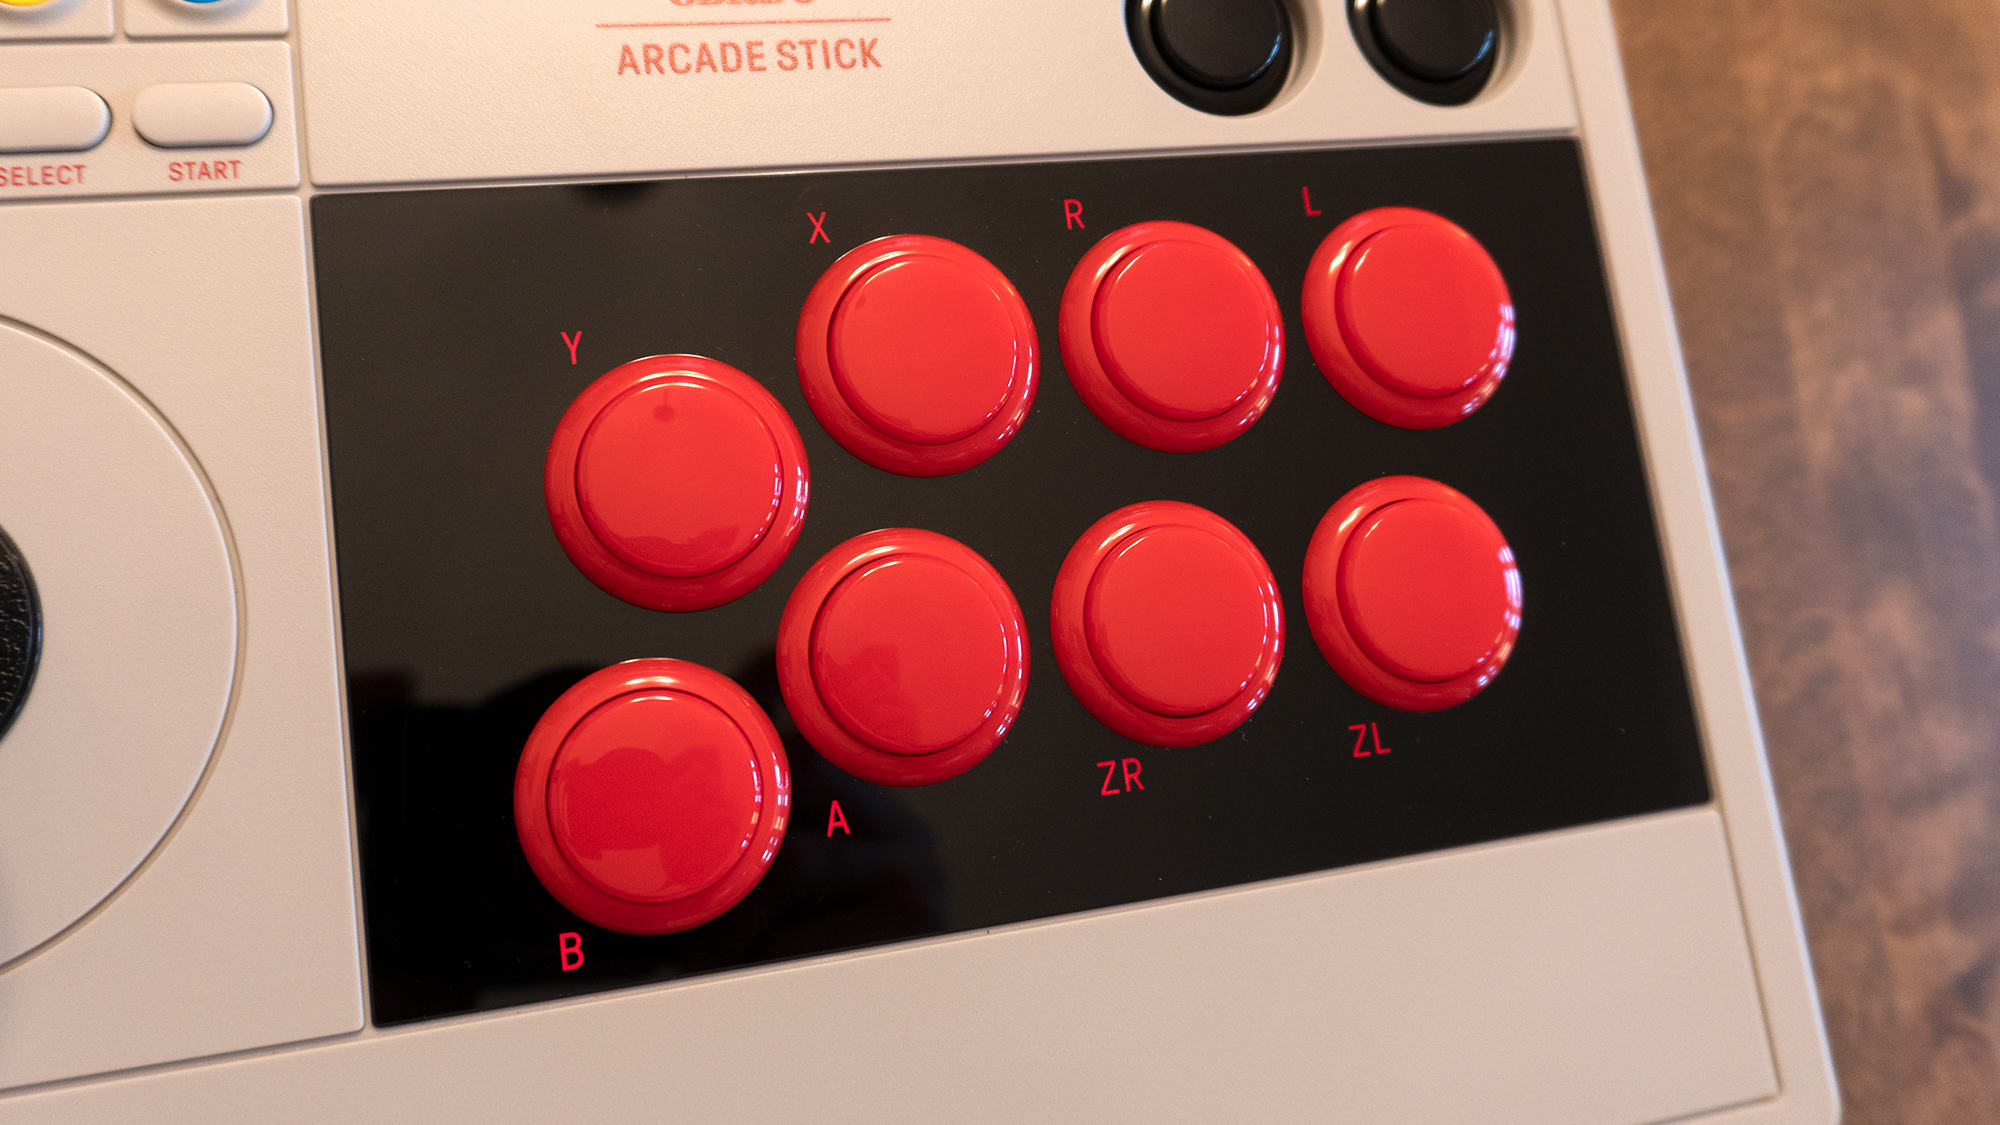 The Arcade Stick's joystick and buttons can all be easily replaced by removing the controller's back panel if you prefer the feel of arcade hardware from another manufacturer. (Photo: Andrew Liszewski / Gizmodo)